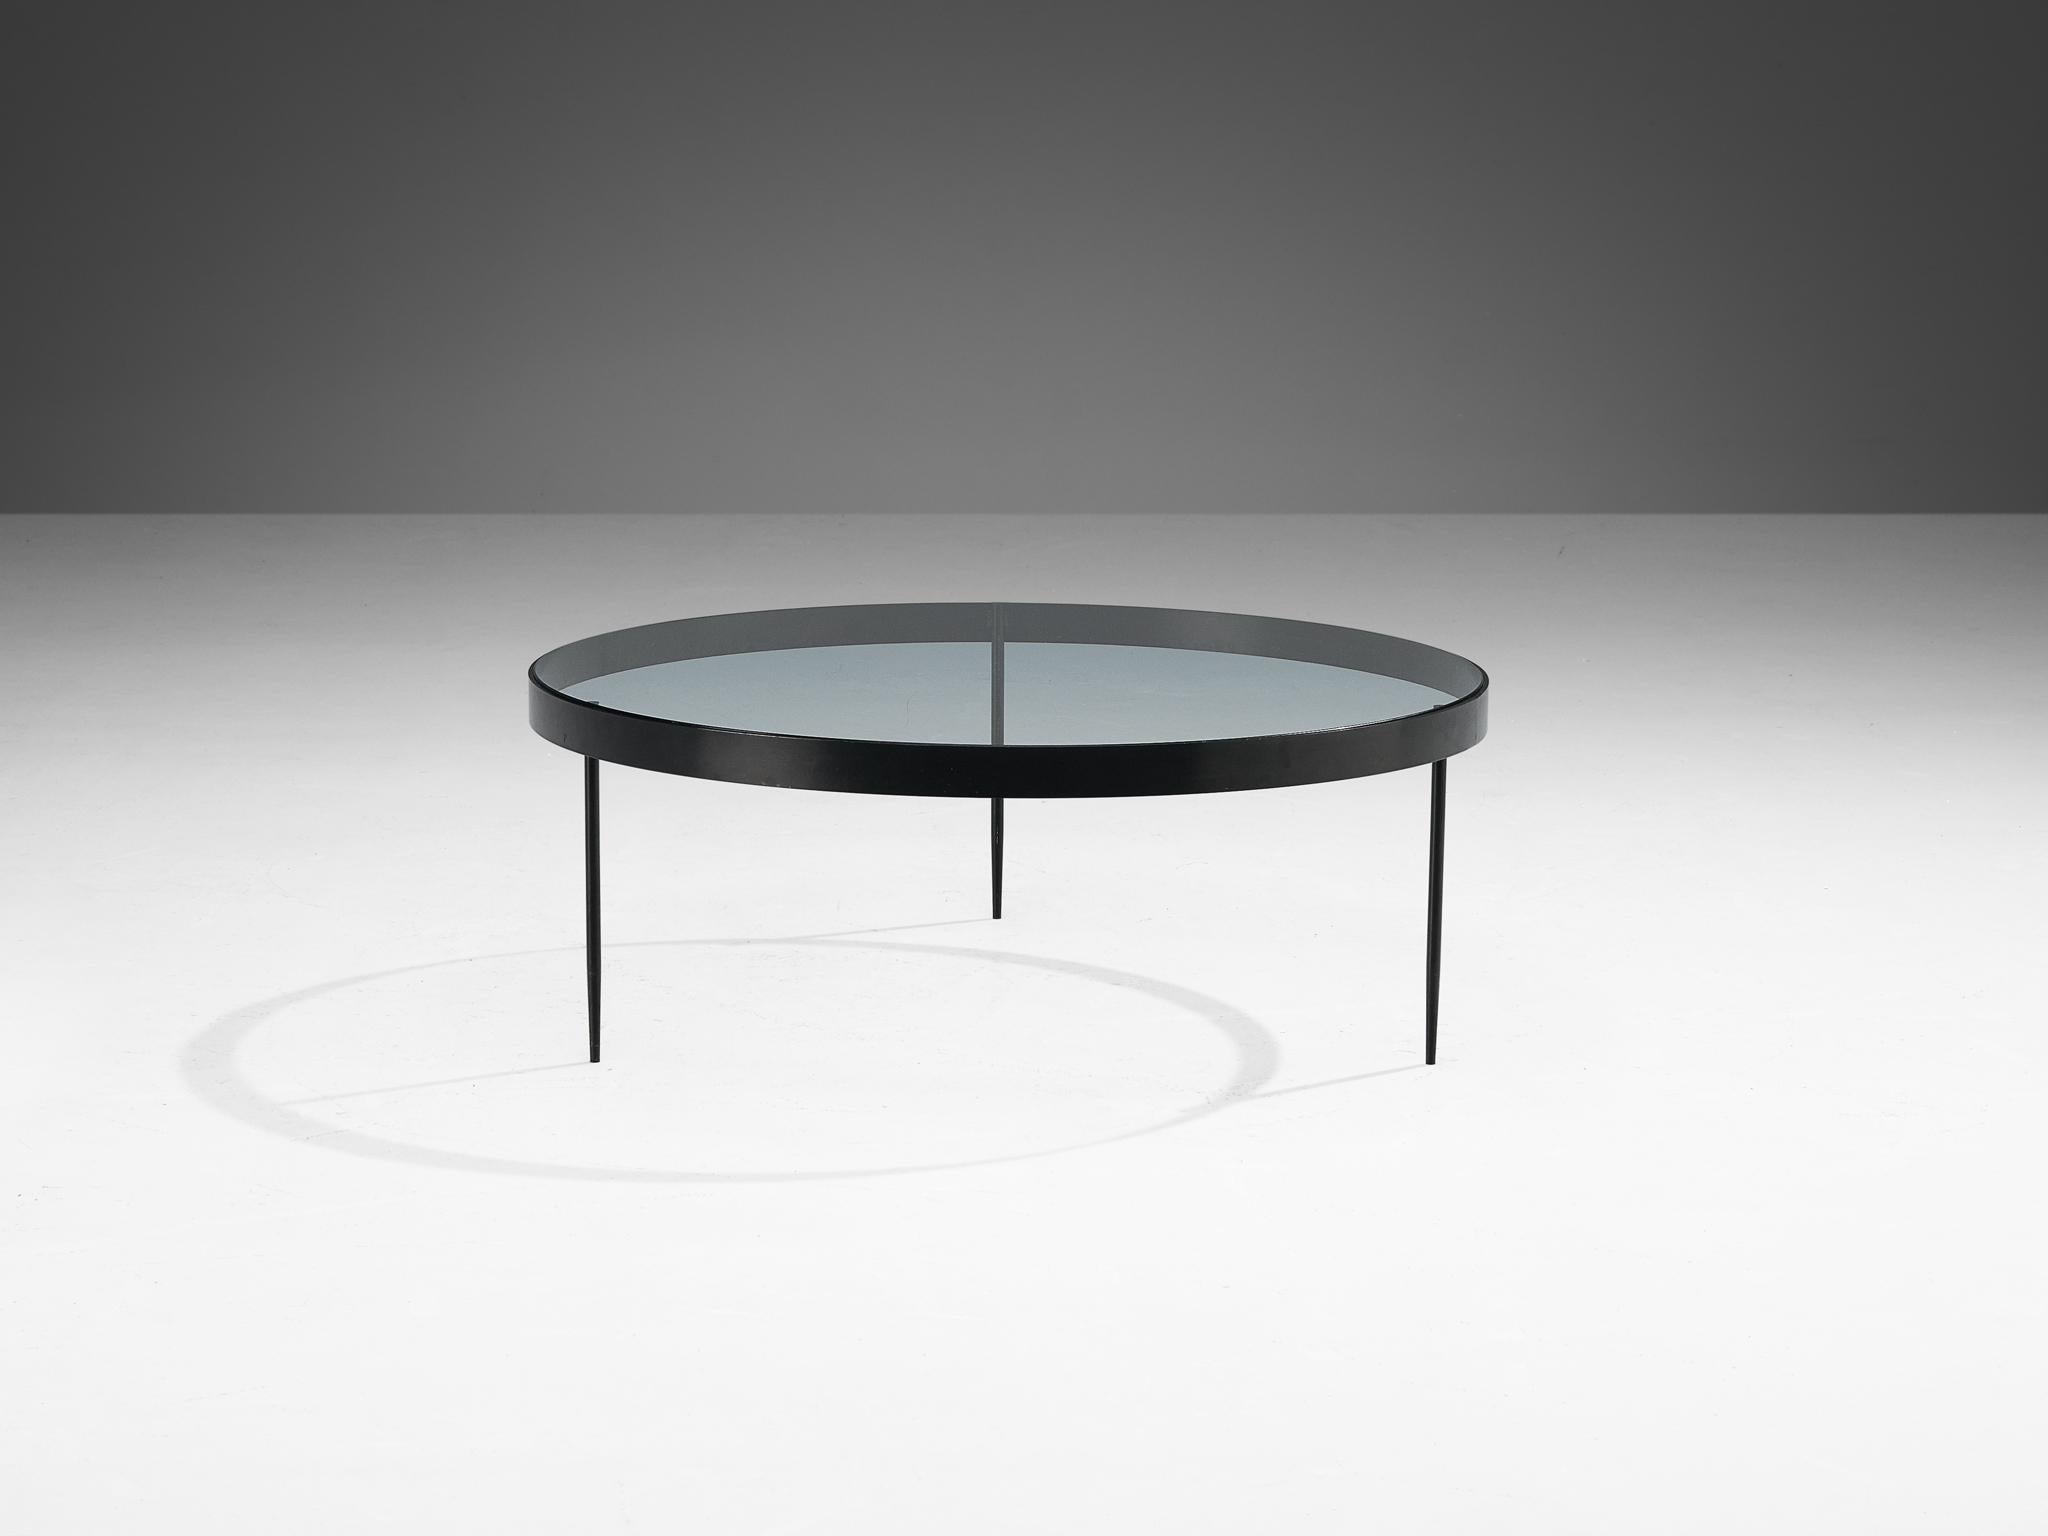 Janni Van Pelt, coffee table, glass and black metal, the Netherlands, design 1958

Round coffee table in black coated metal and glass. This table is a variation on Janni Van Pelts model G4. The base consists of four legs with a cross-connection. The